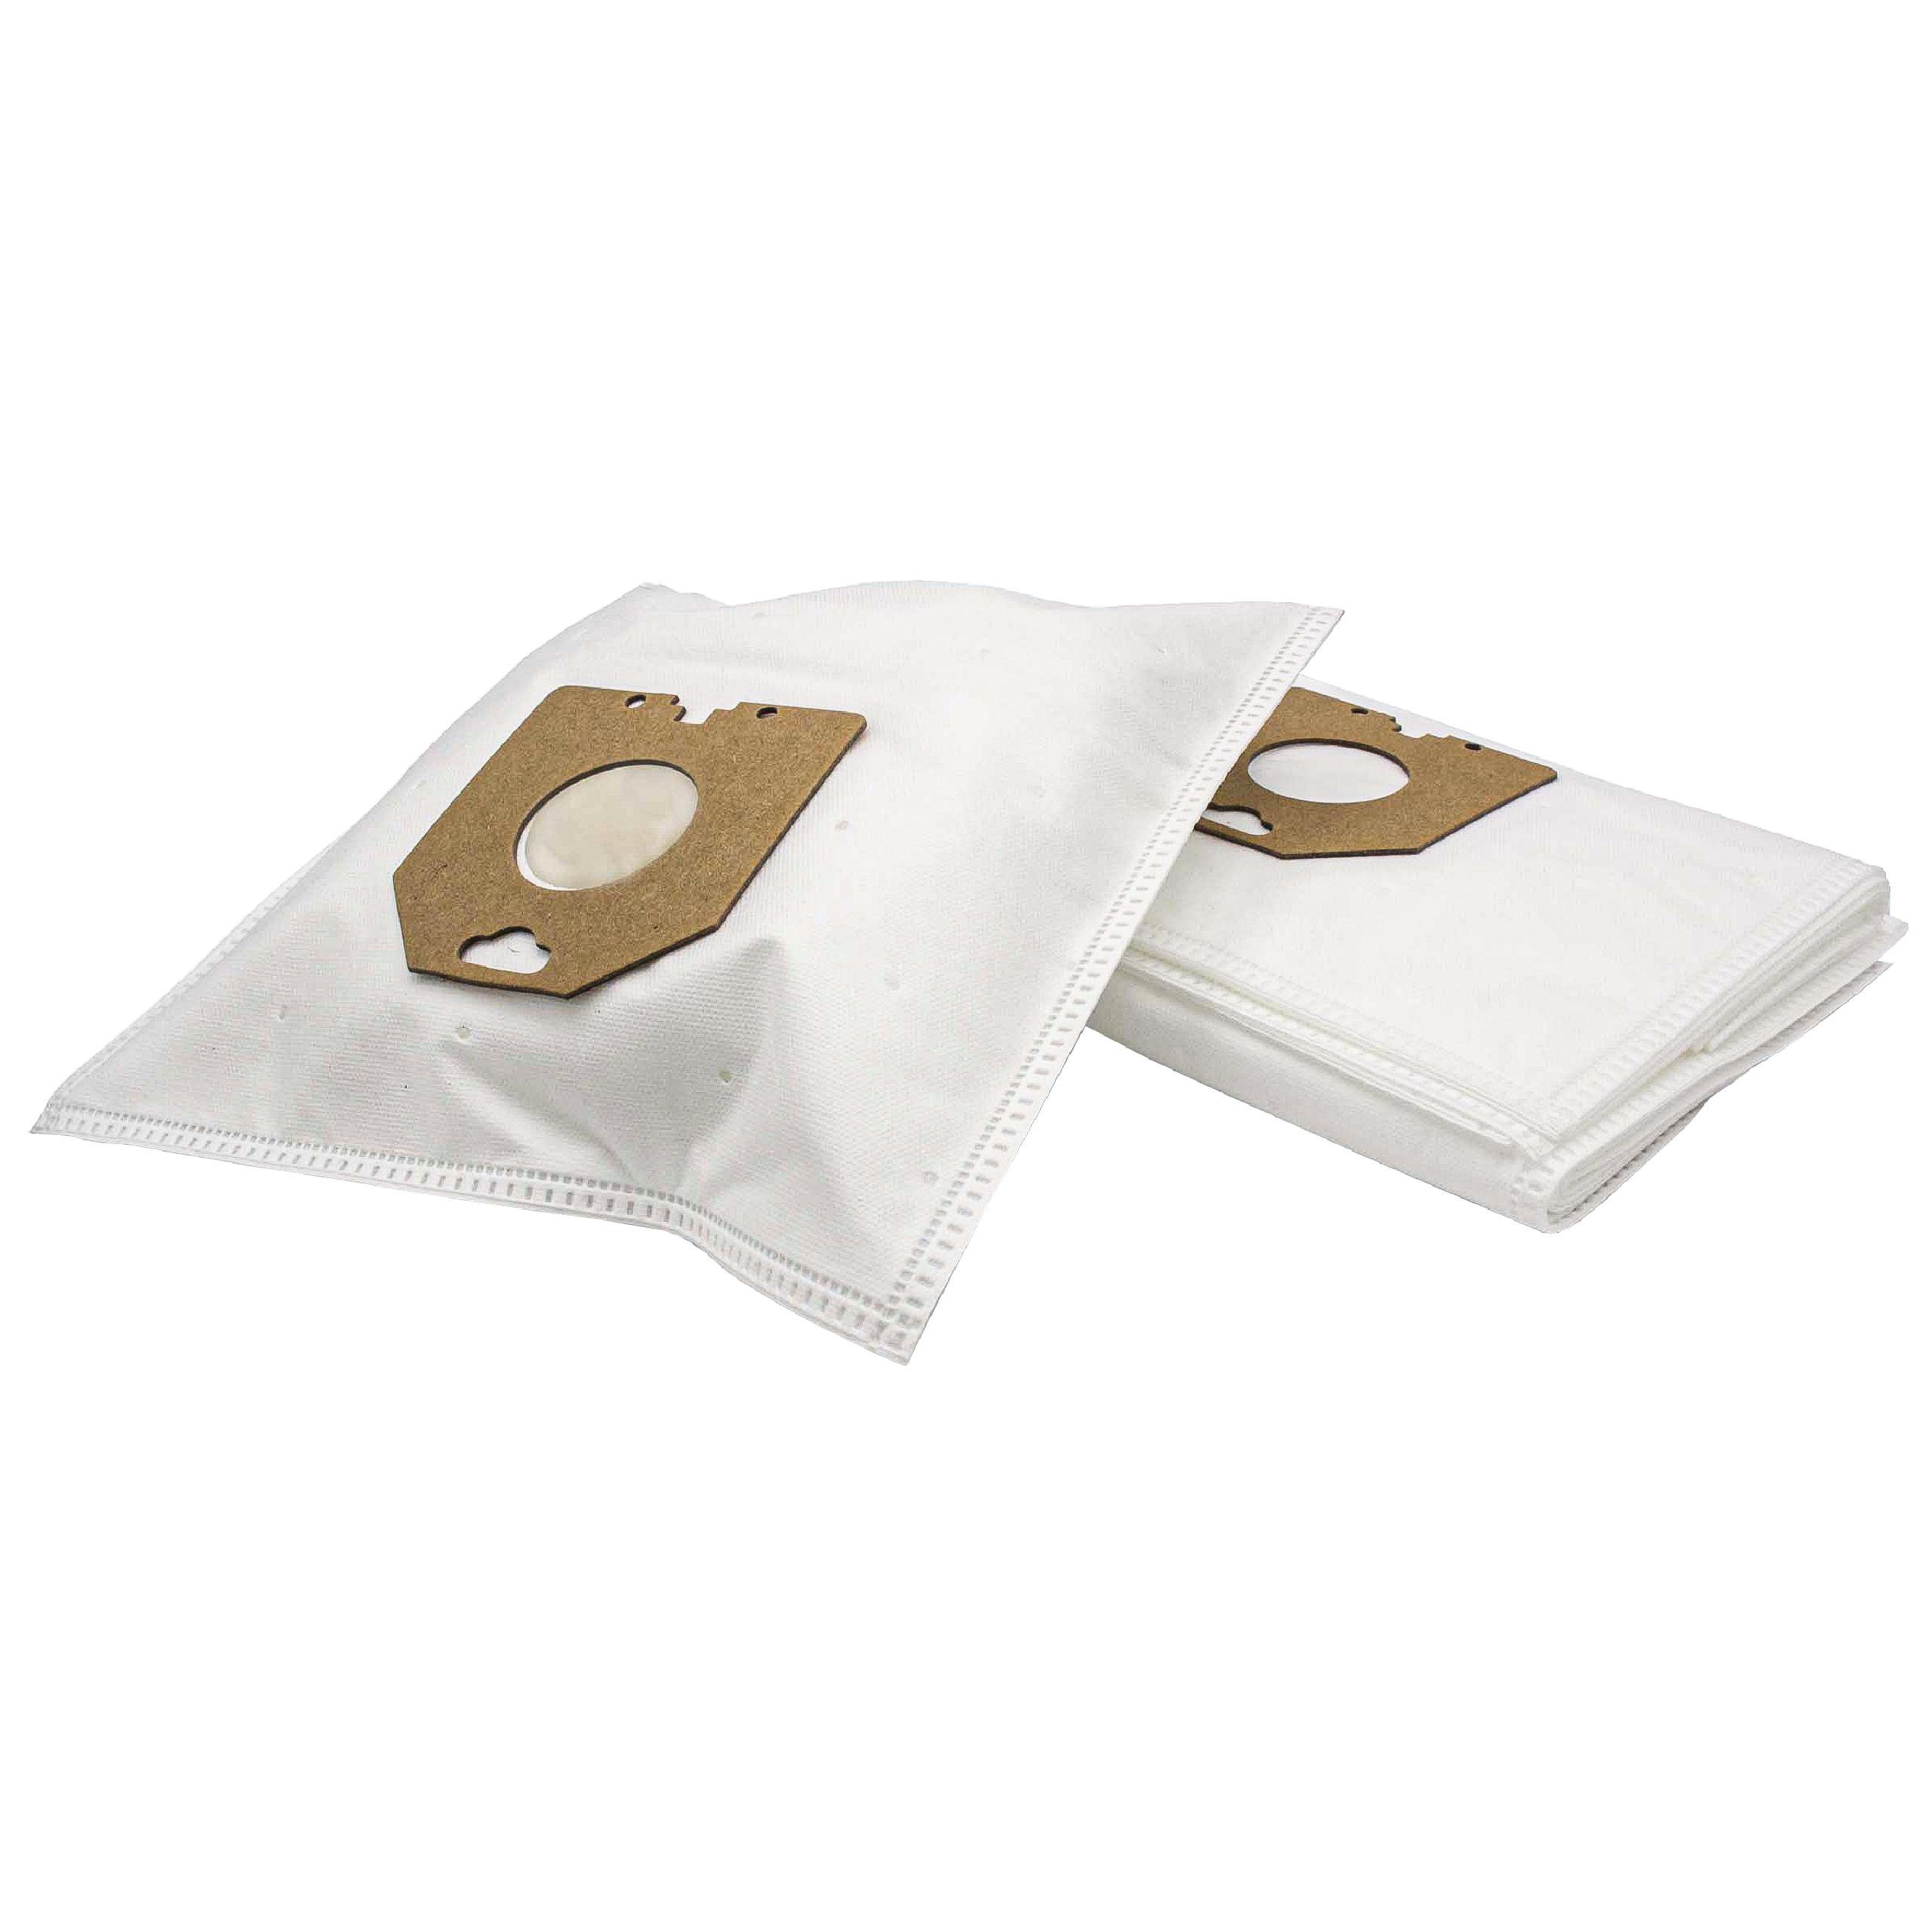 10x Vacuum Cleaner Bag suitable for Philips - microfleece